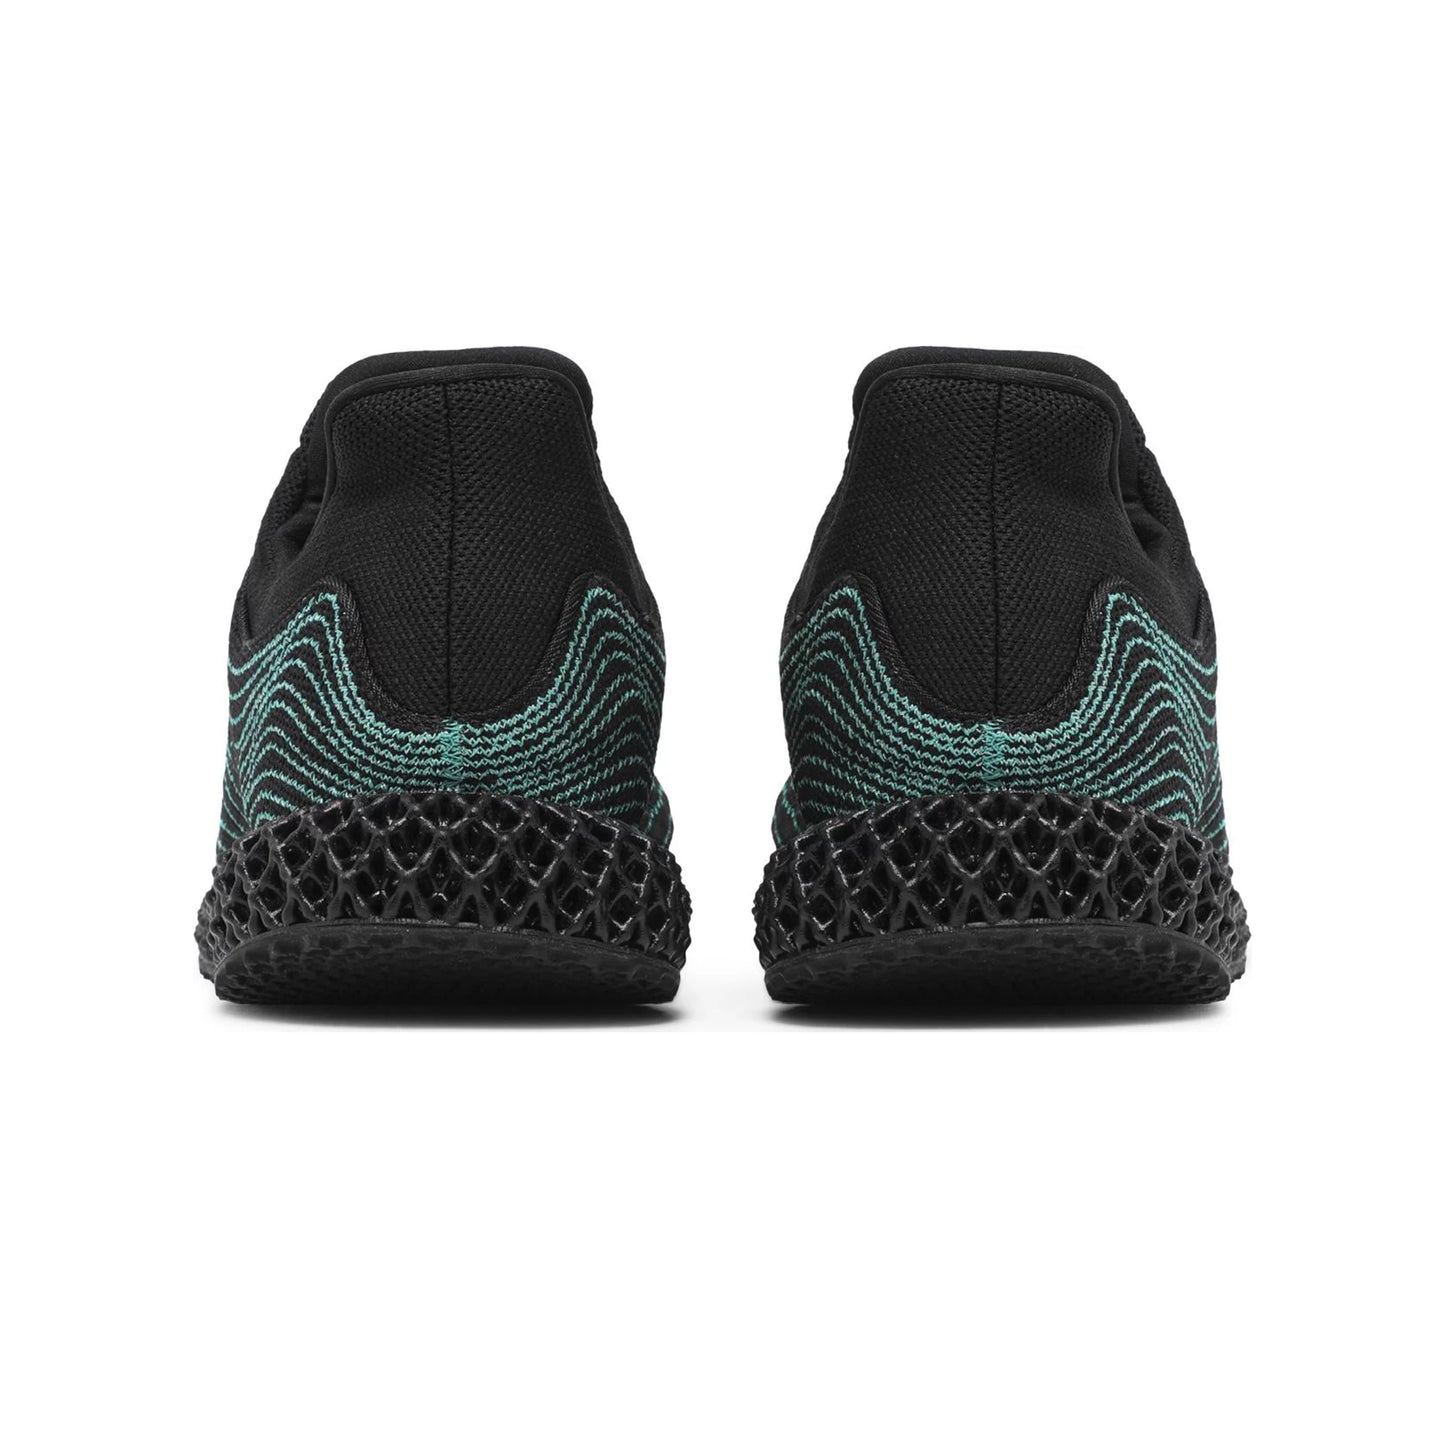 adidas Ultra Boost 4D Uncaged Parley Black